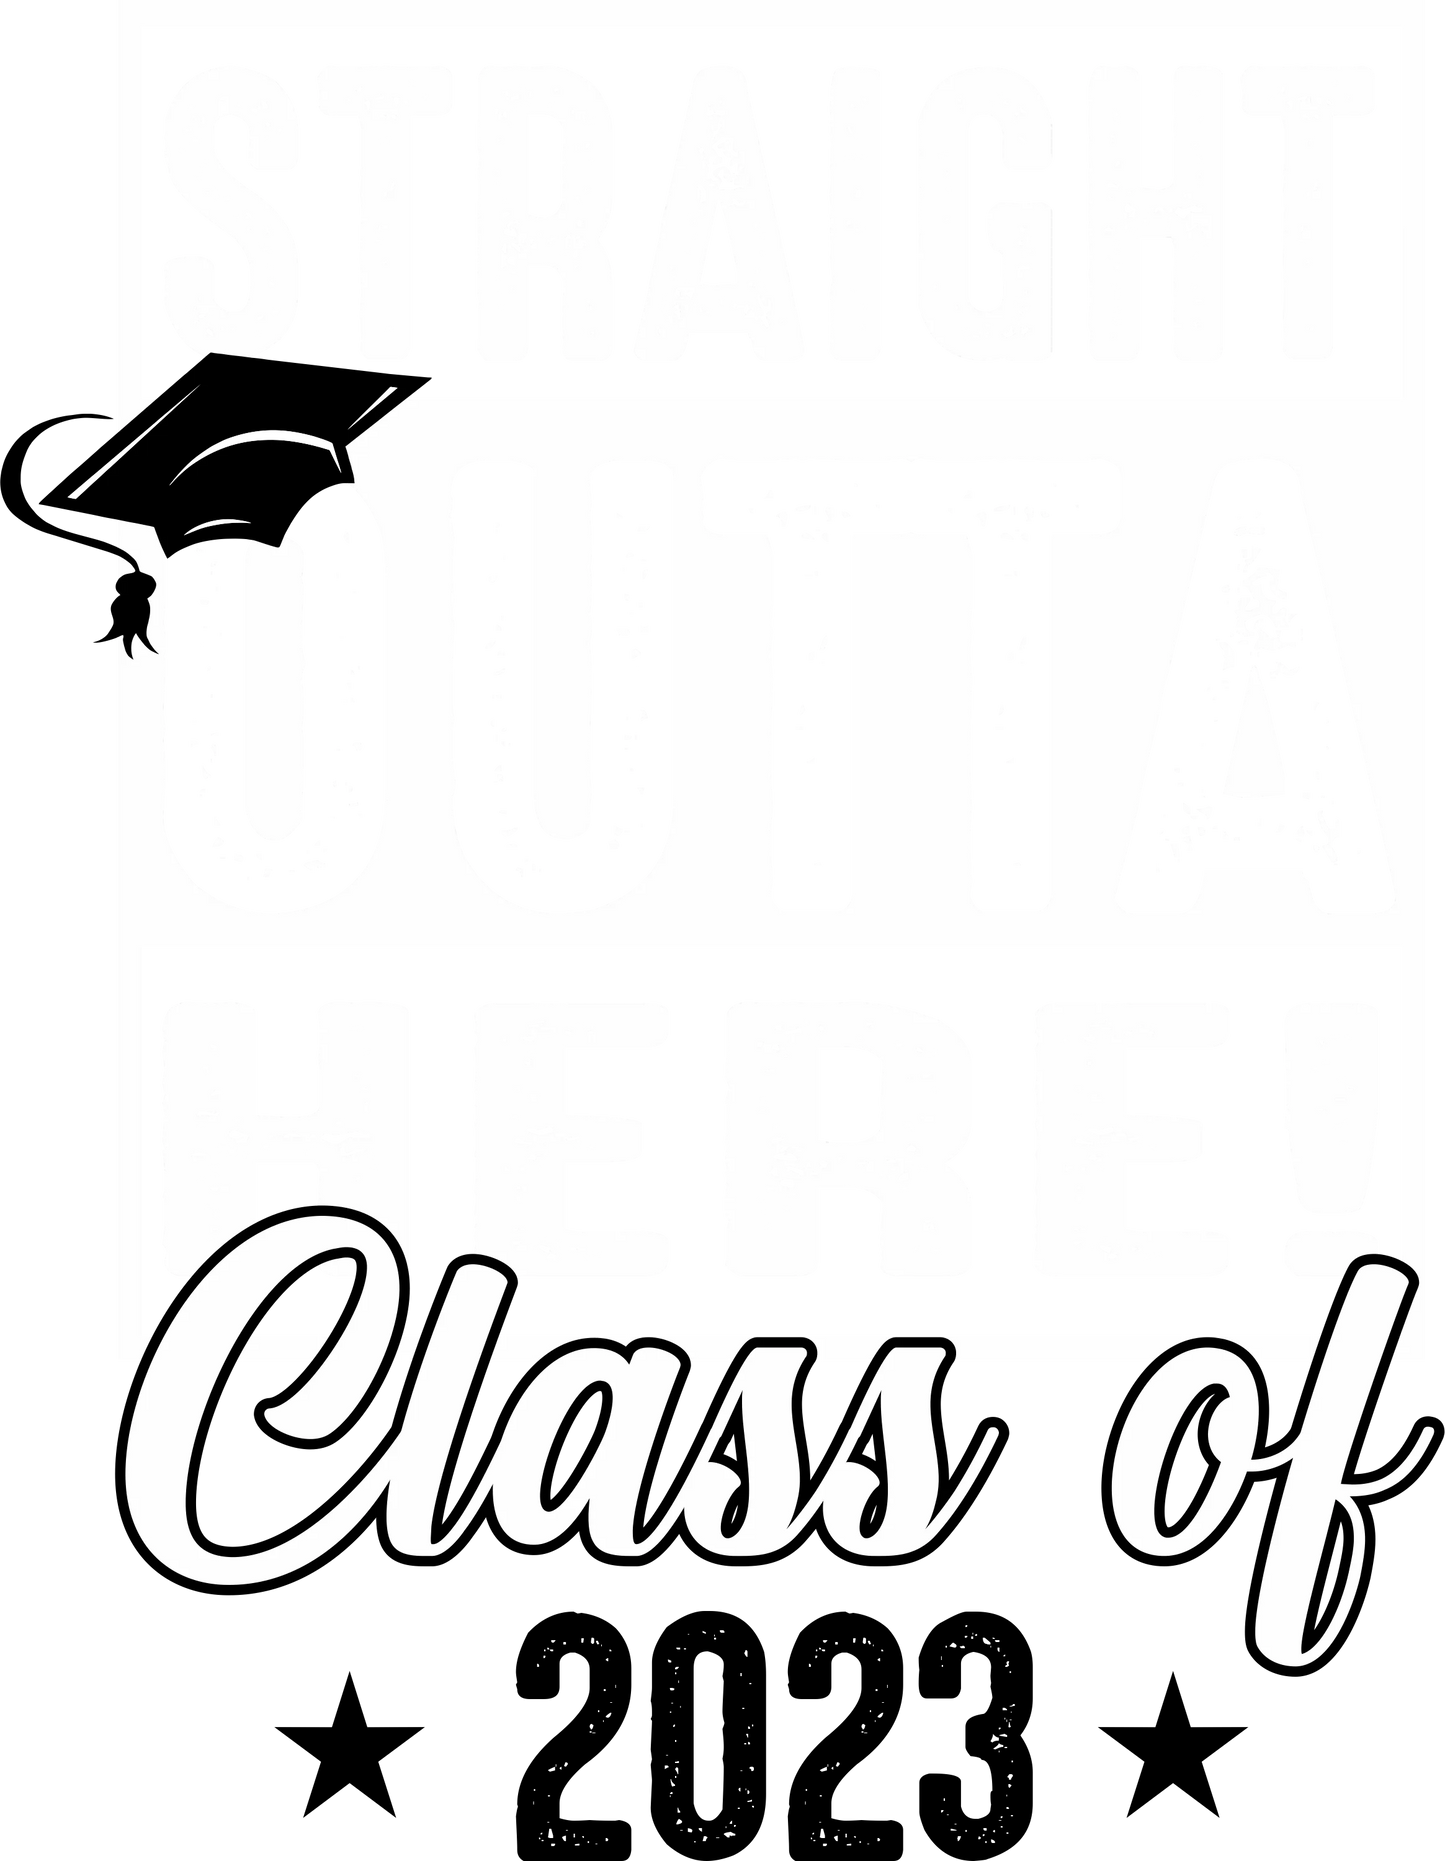 G23-5 Straight Outta Here! Class of 2023, DTF Transfer, Apparel & Accessories, Ace DTF